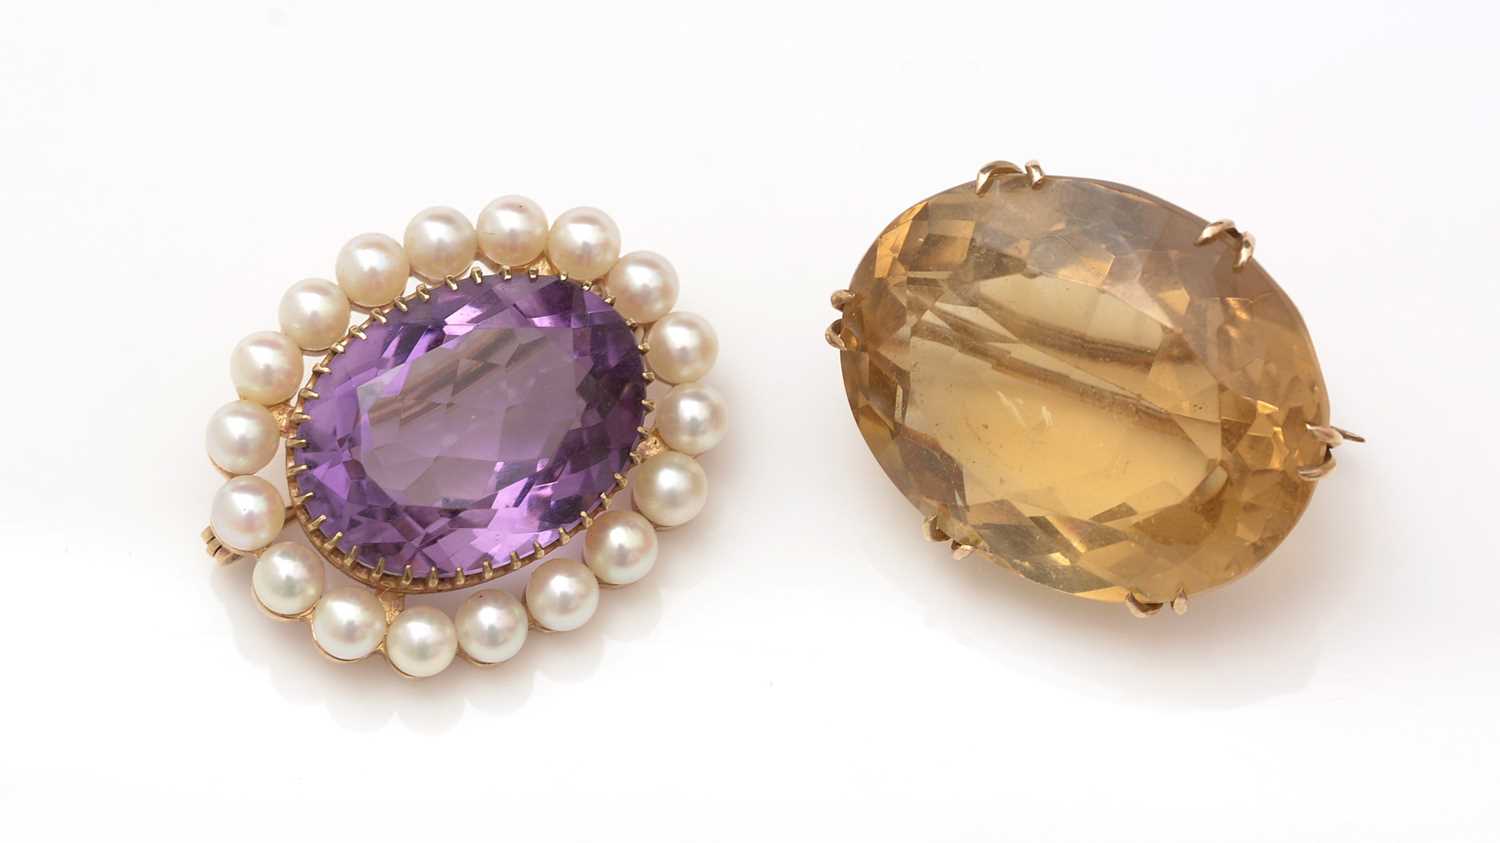 Lot 401 - A citrine brooch and an amethyst and cultured pearl brooch.